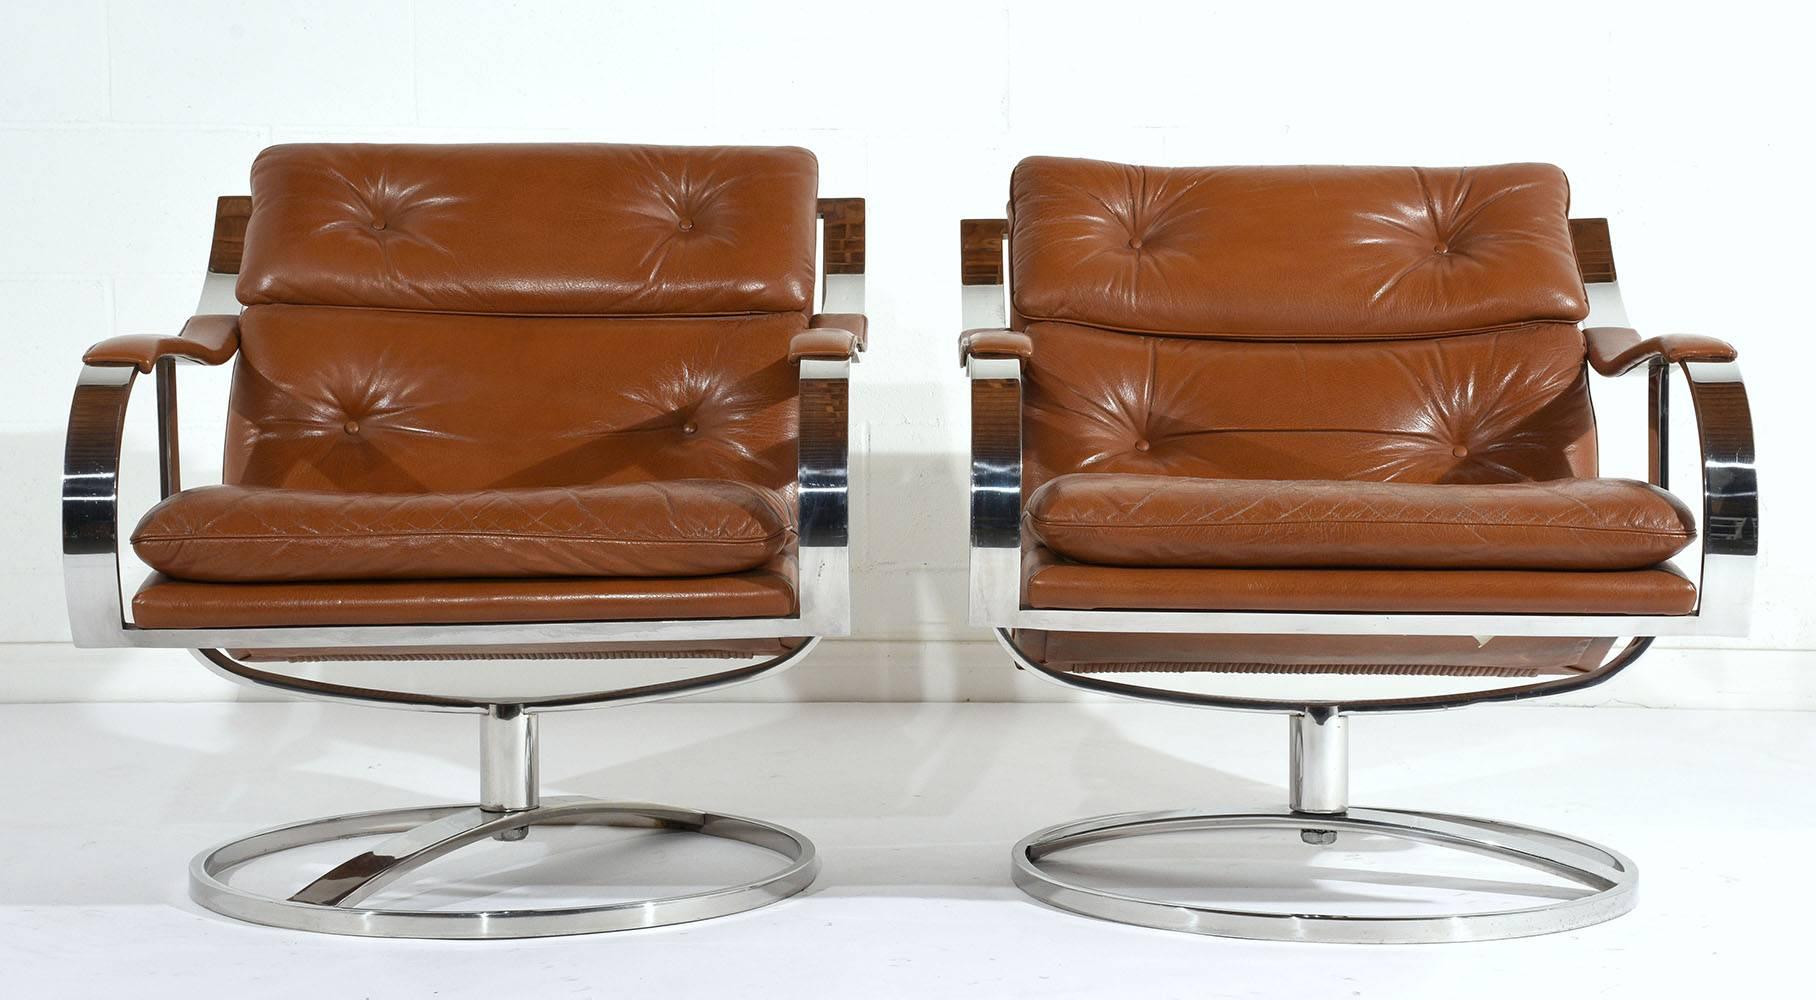 This pair of 1970s Mid-Century Moderns style swivel lounge chairs is made by Gardner Leaver. The steel frame is finished in chrome with rounded and square edges. The lounge chairs are upholstered in the original cognac colored leather in very good